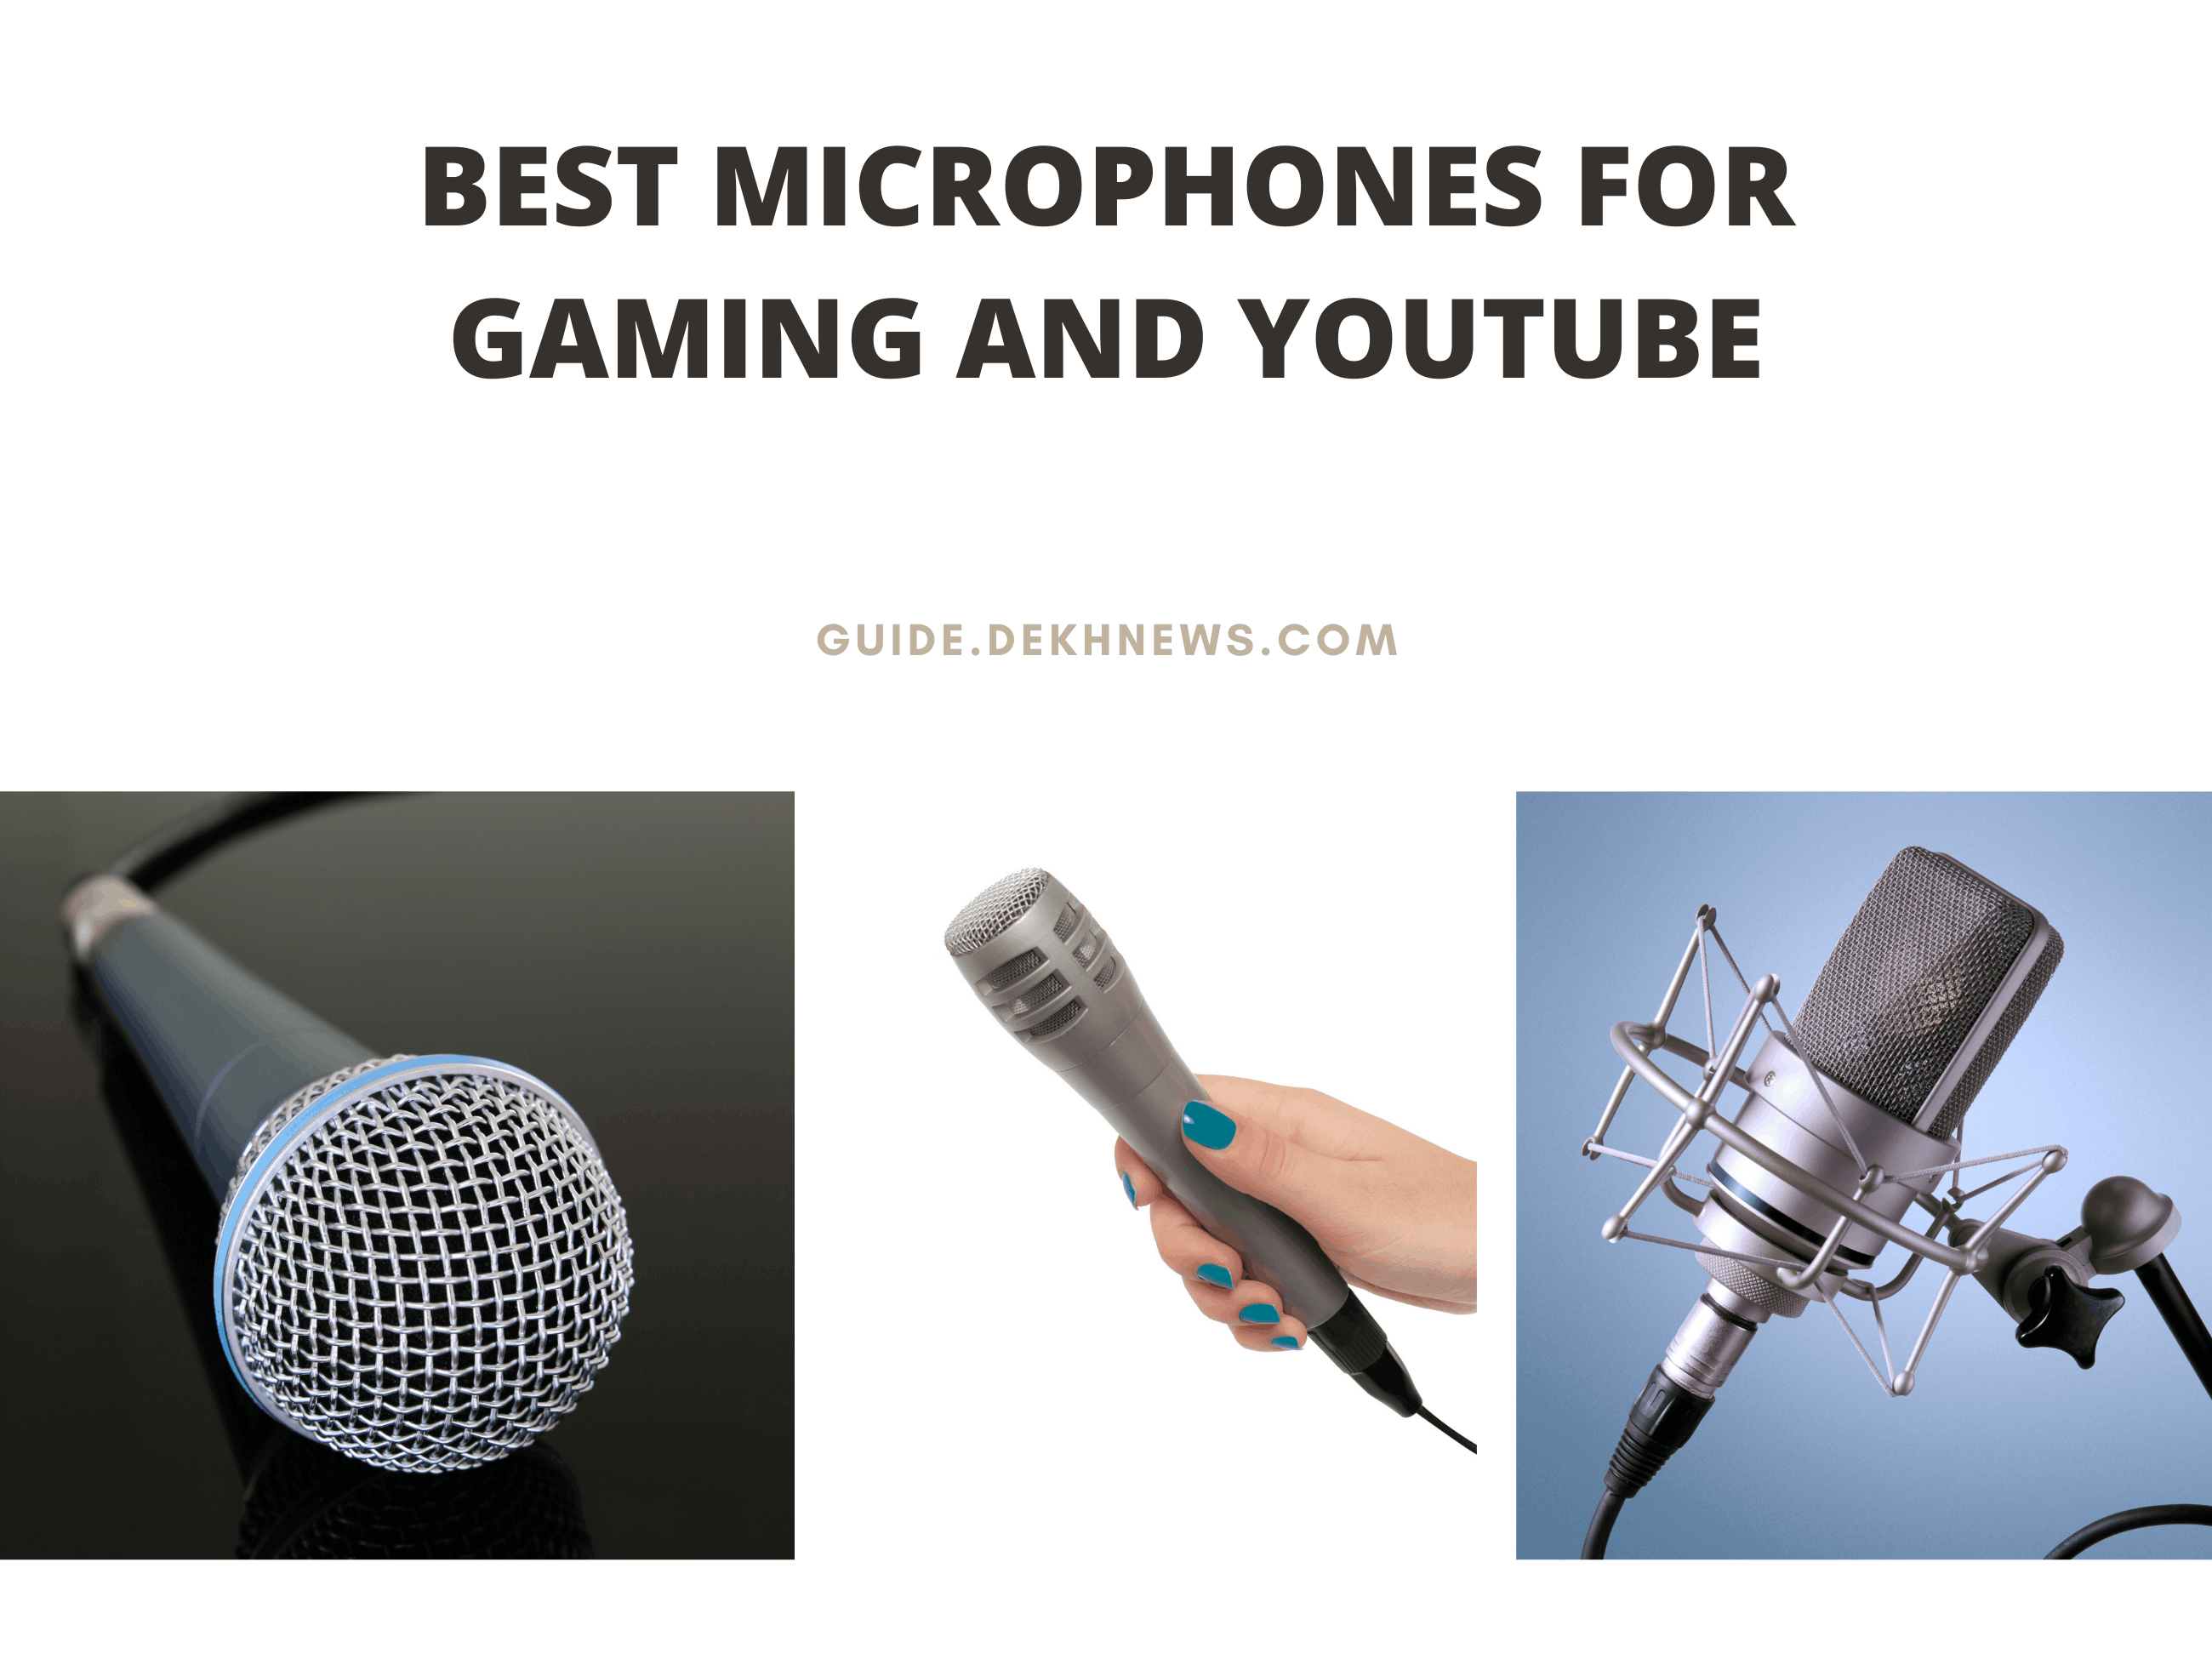 Best Microphones for Gaming and YouTube